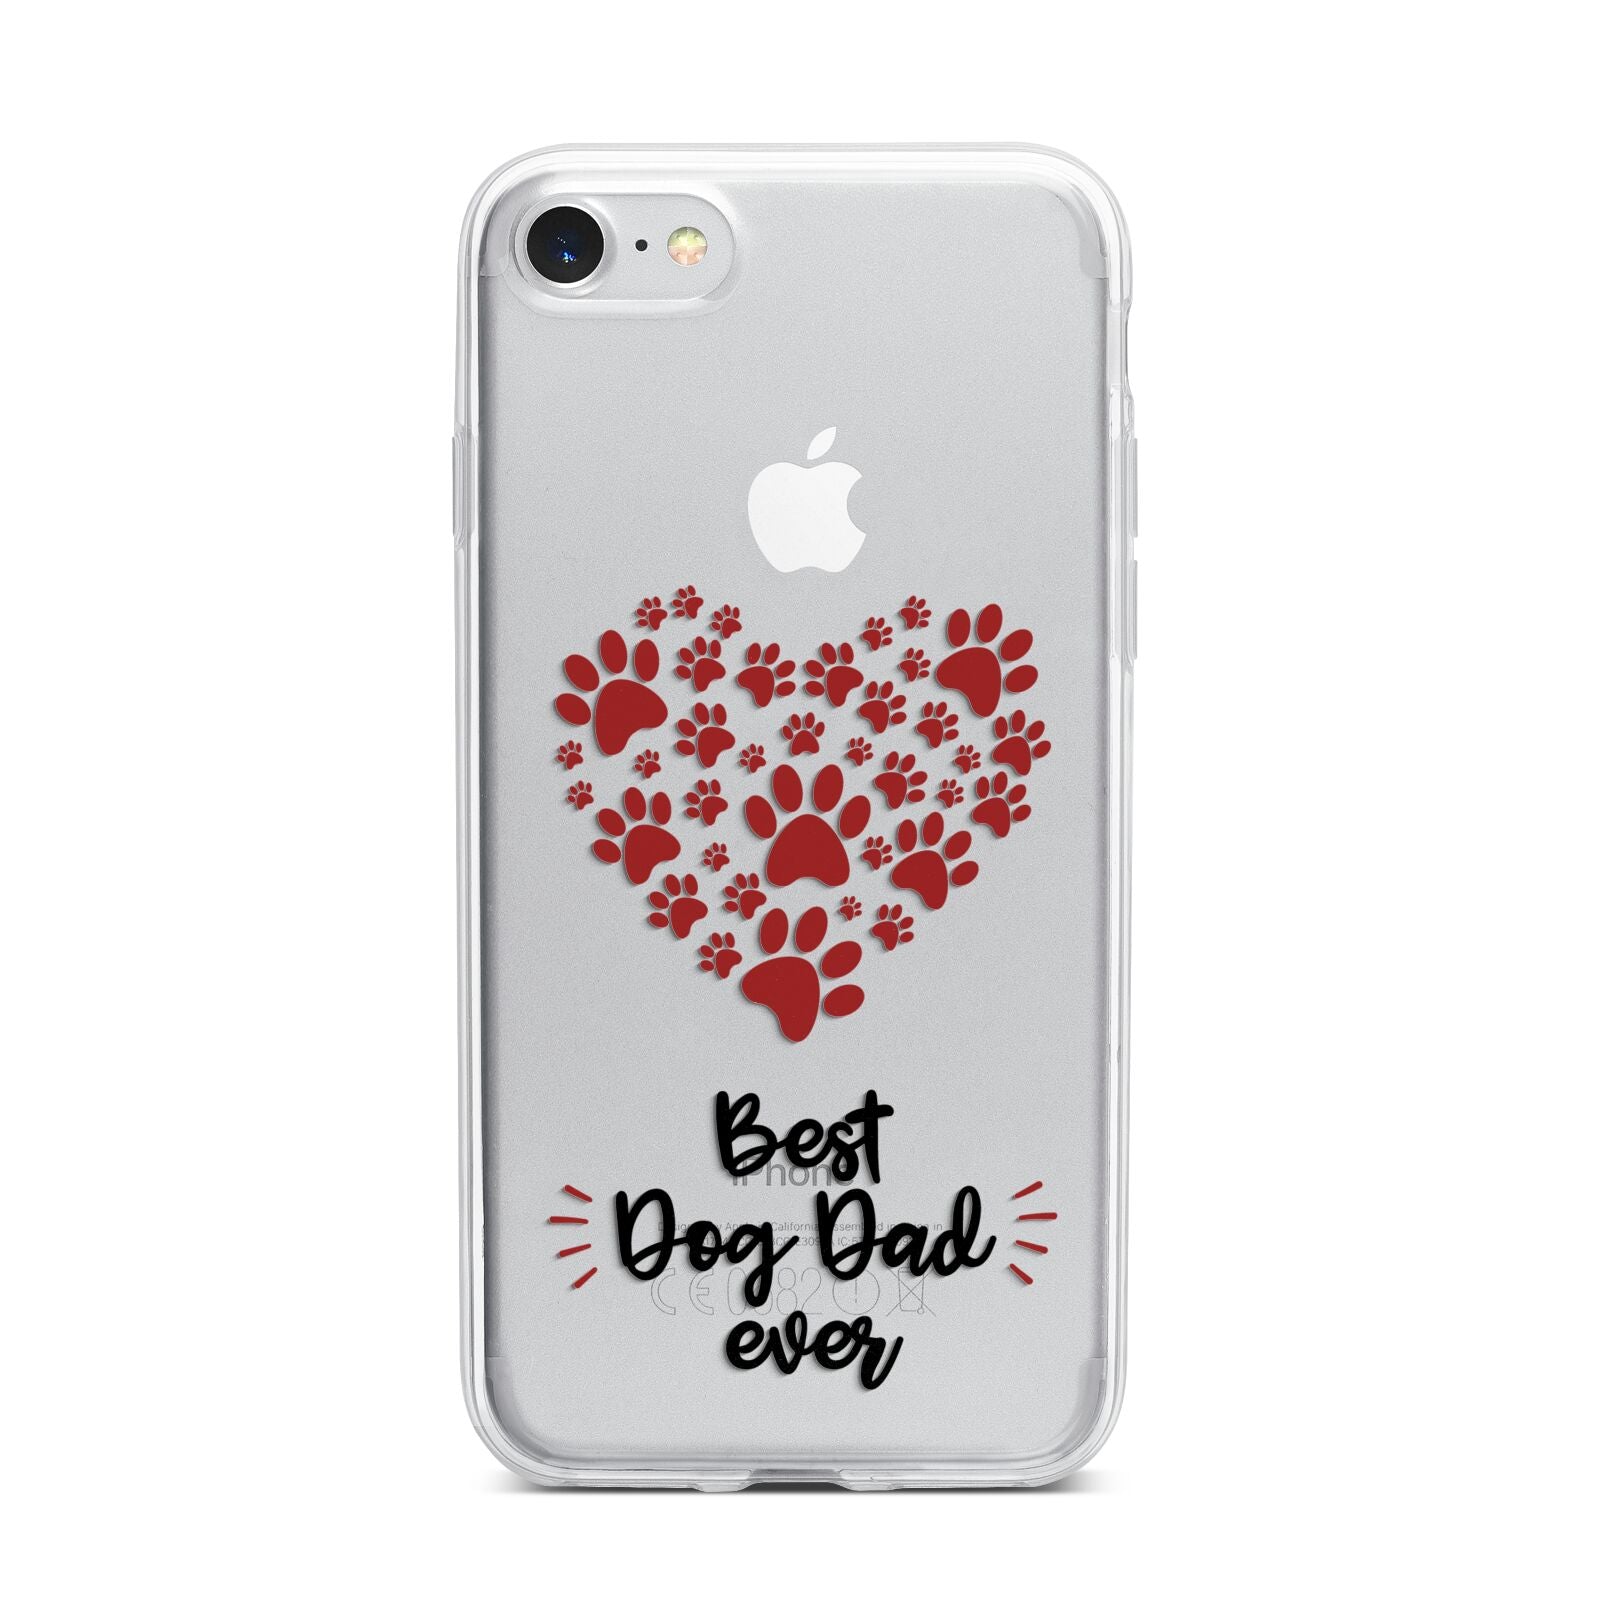 Best Dog Dad Paws iPhone 7 Bumper Case on Silver iPhone